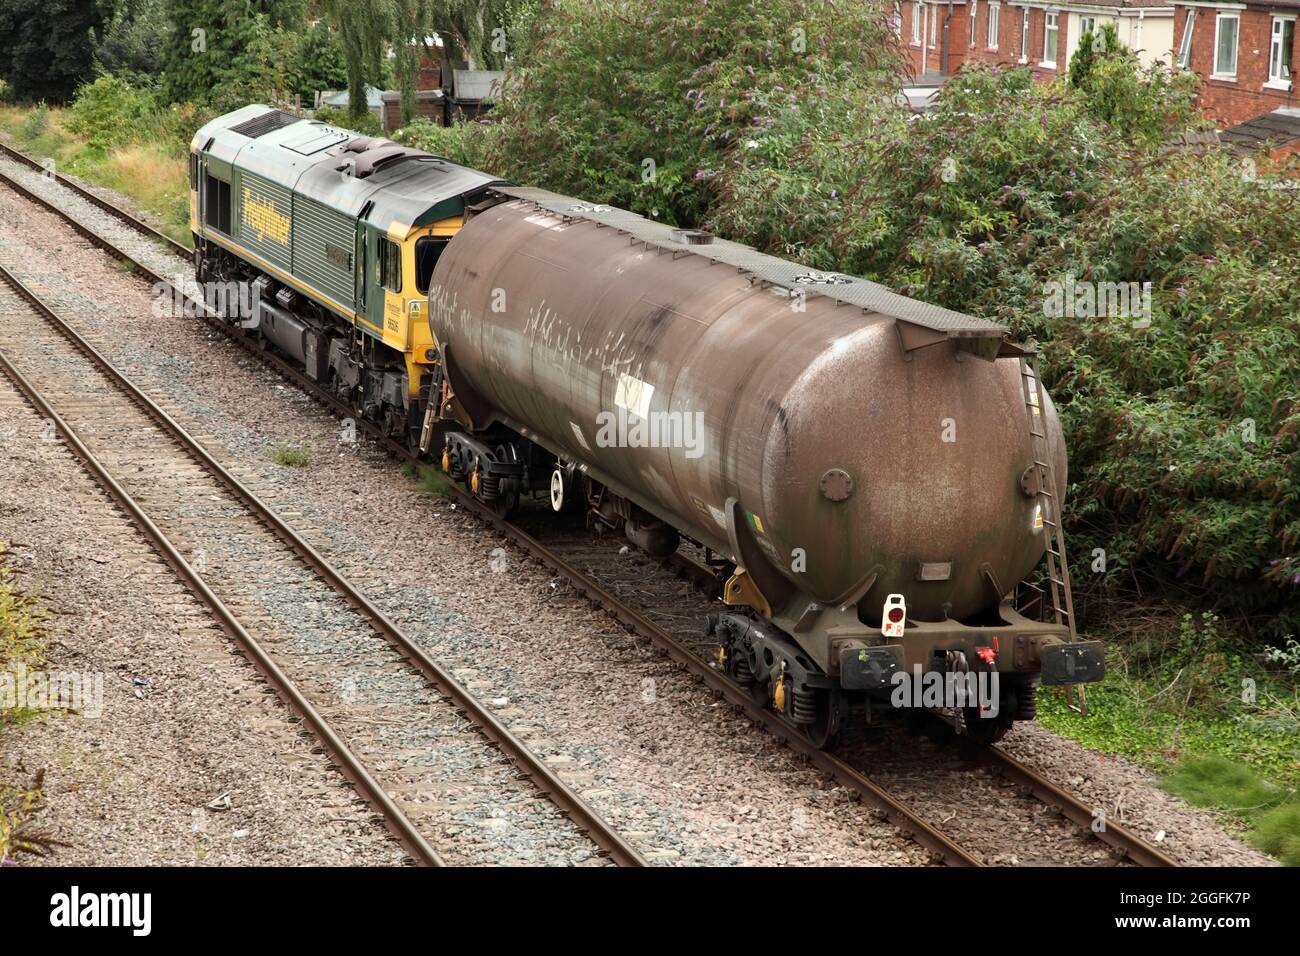 Freightliner Class 66 loco 66506 'Crewe Regeneration' hauling the one-wagon 0914 Ipswich to Lindsey Oil Refinery service through Scunthorpe: 31/8/21. Stock Photo